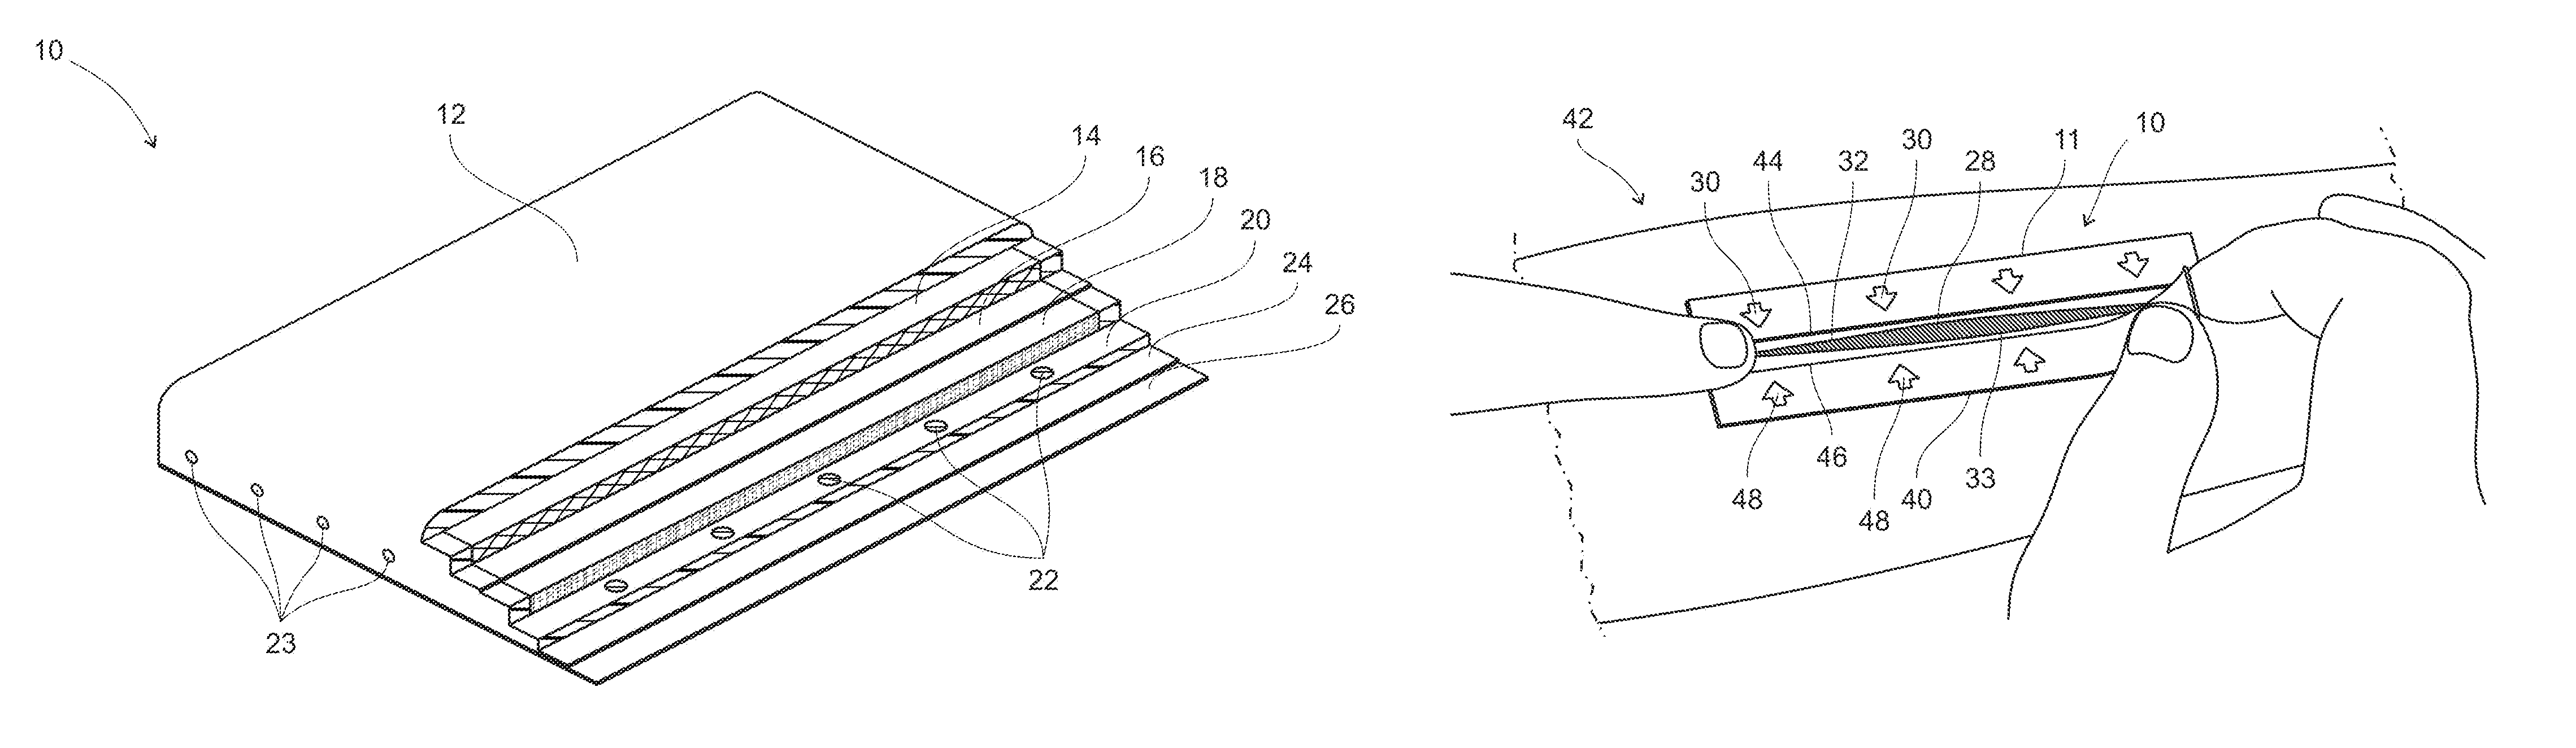 Magnetic wound closure device and method of use